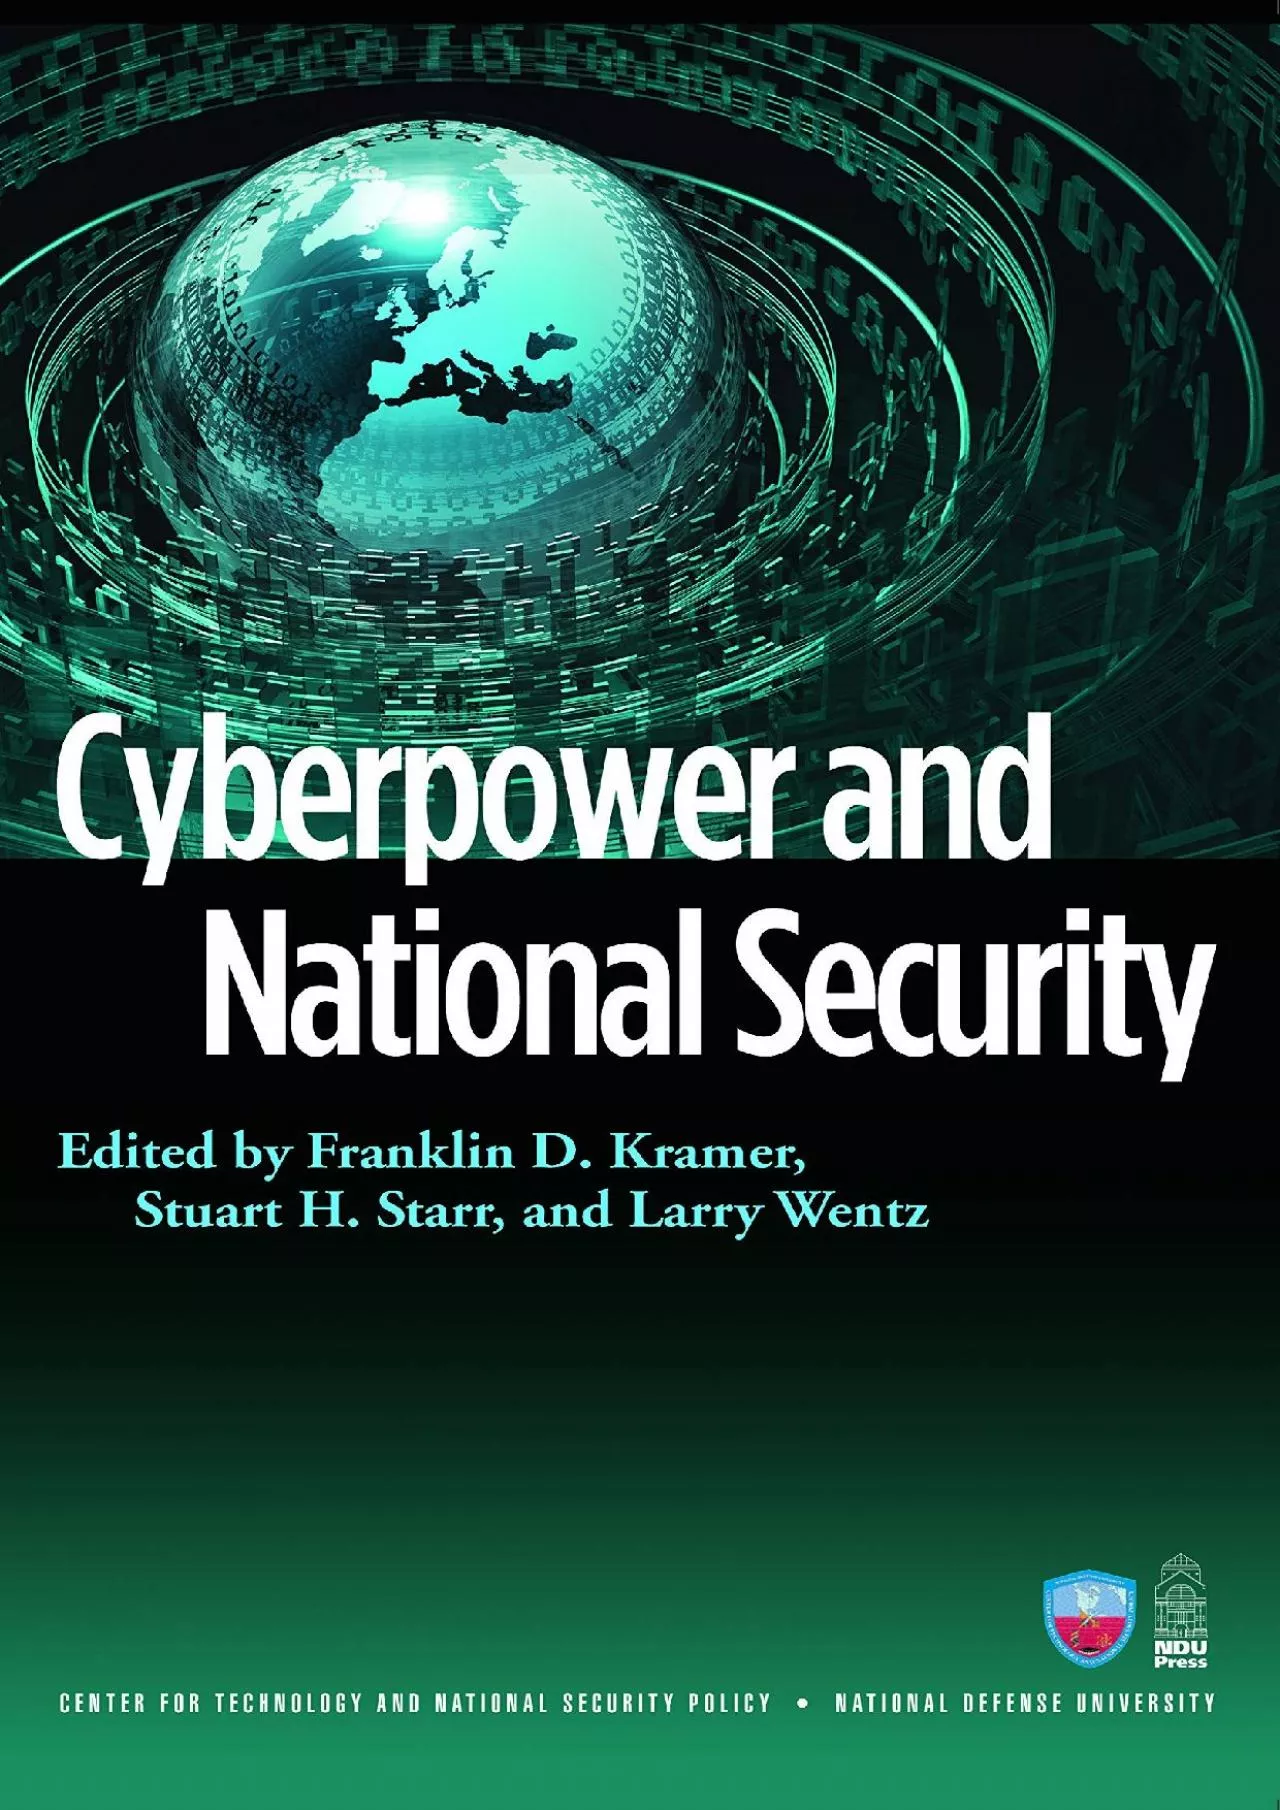 [BEST]-Cyberpower and National Security